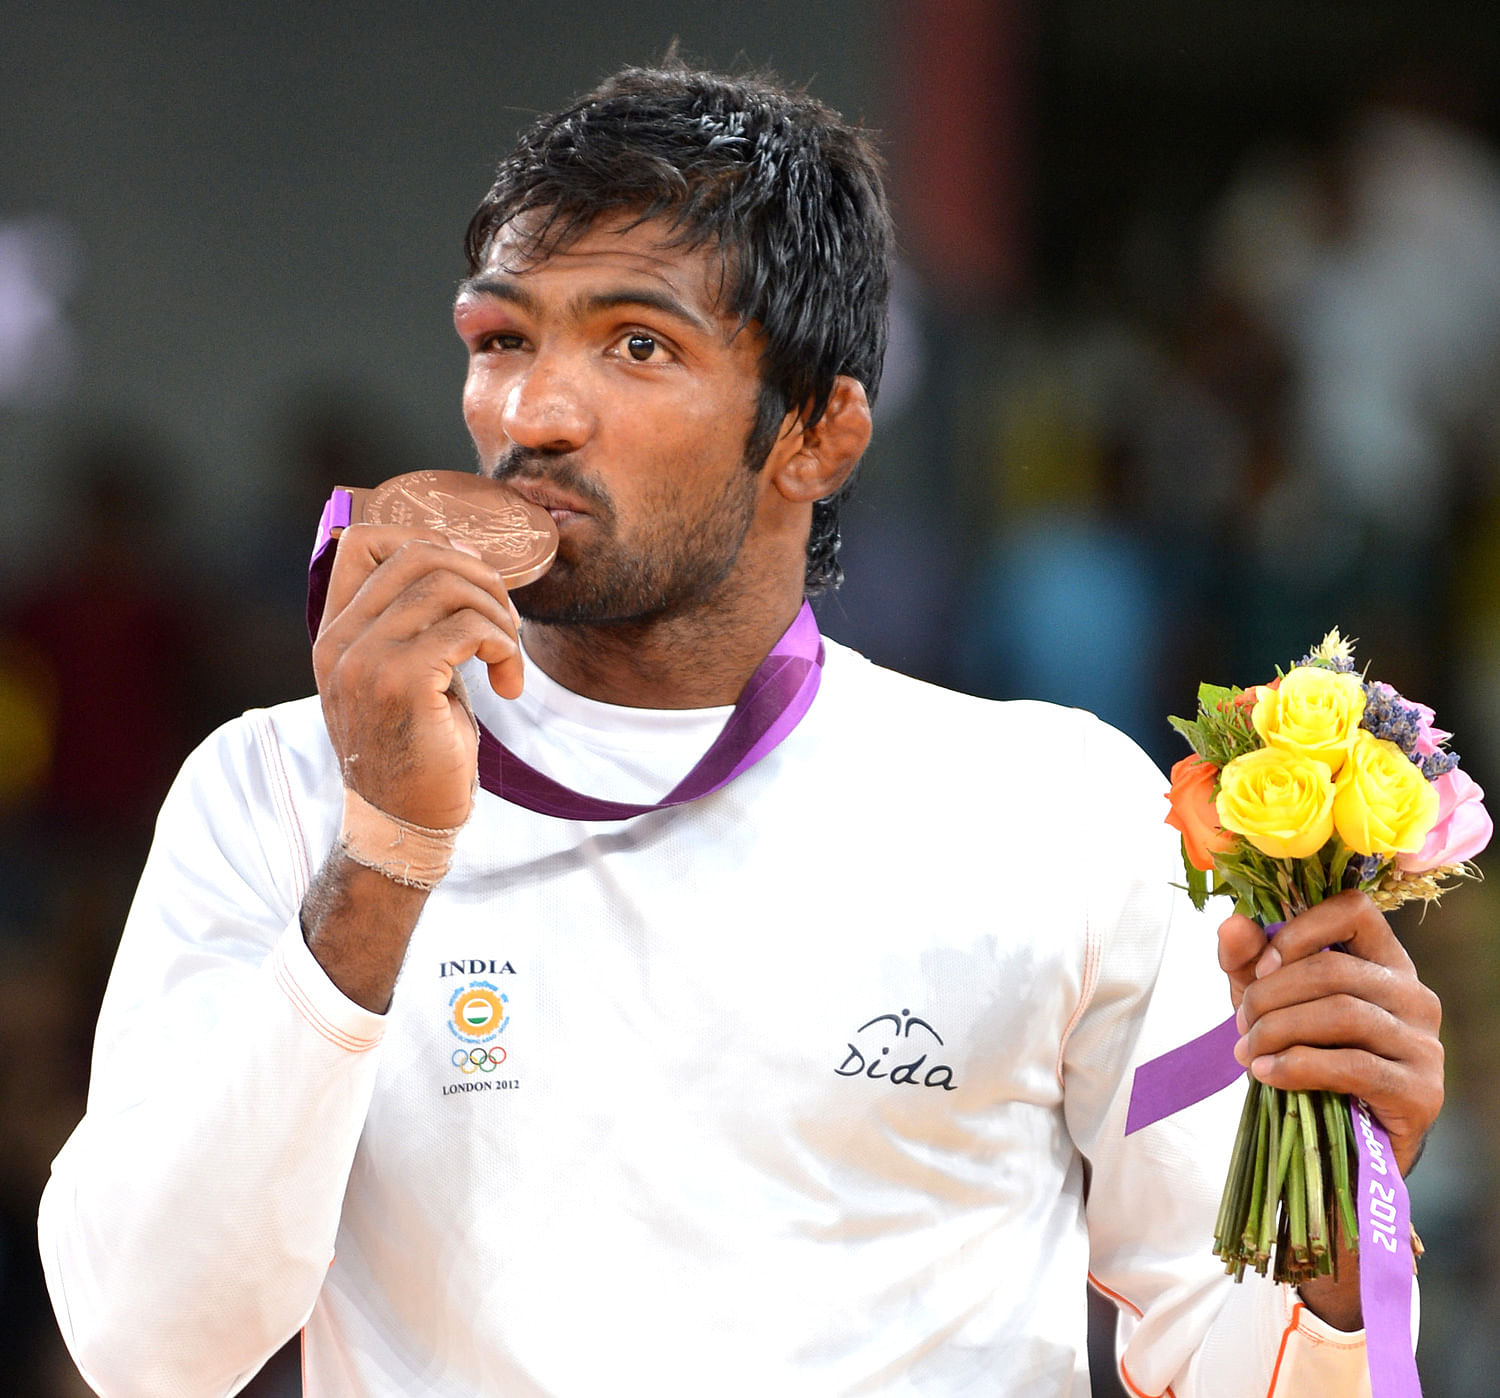 India's Yogeshwar Dutt with Bronze medal during the medal ceremony of Men's 60kg Freestyle wrestling at the Olympic Games in London on Saturday. DH Photo/ KN Shanth Kumar